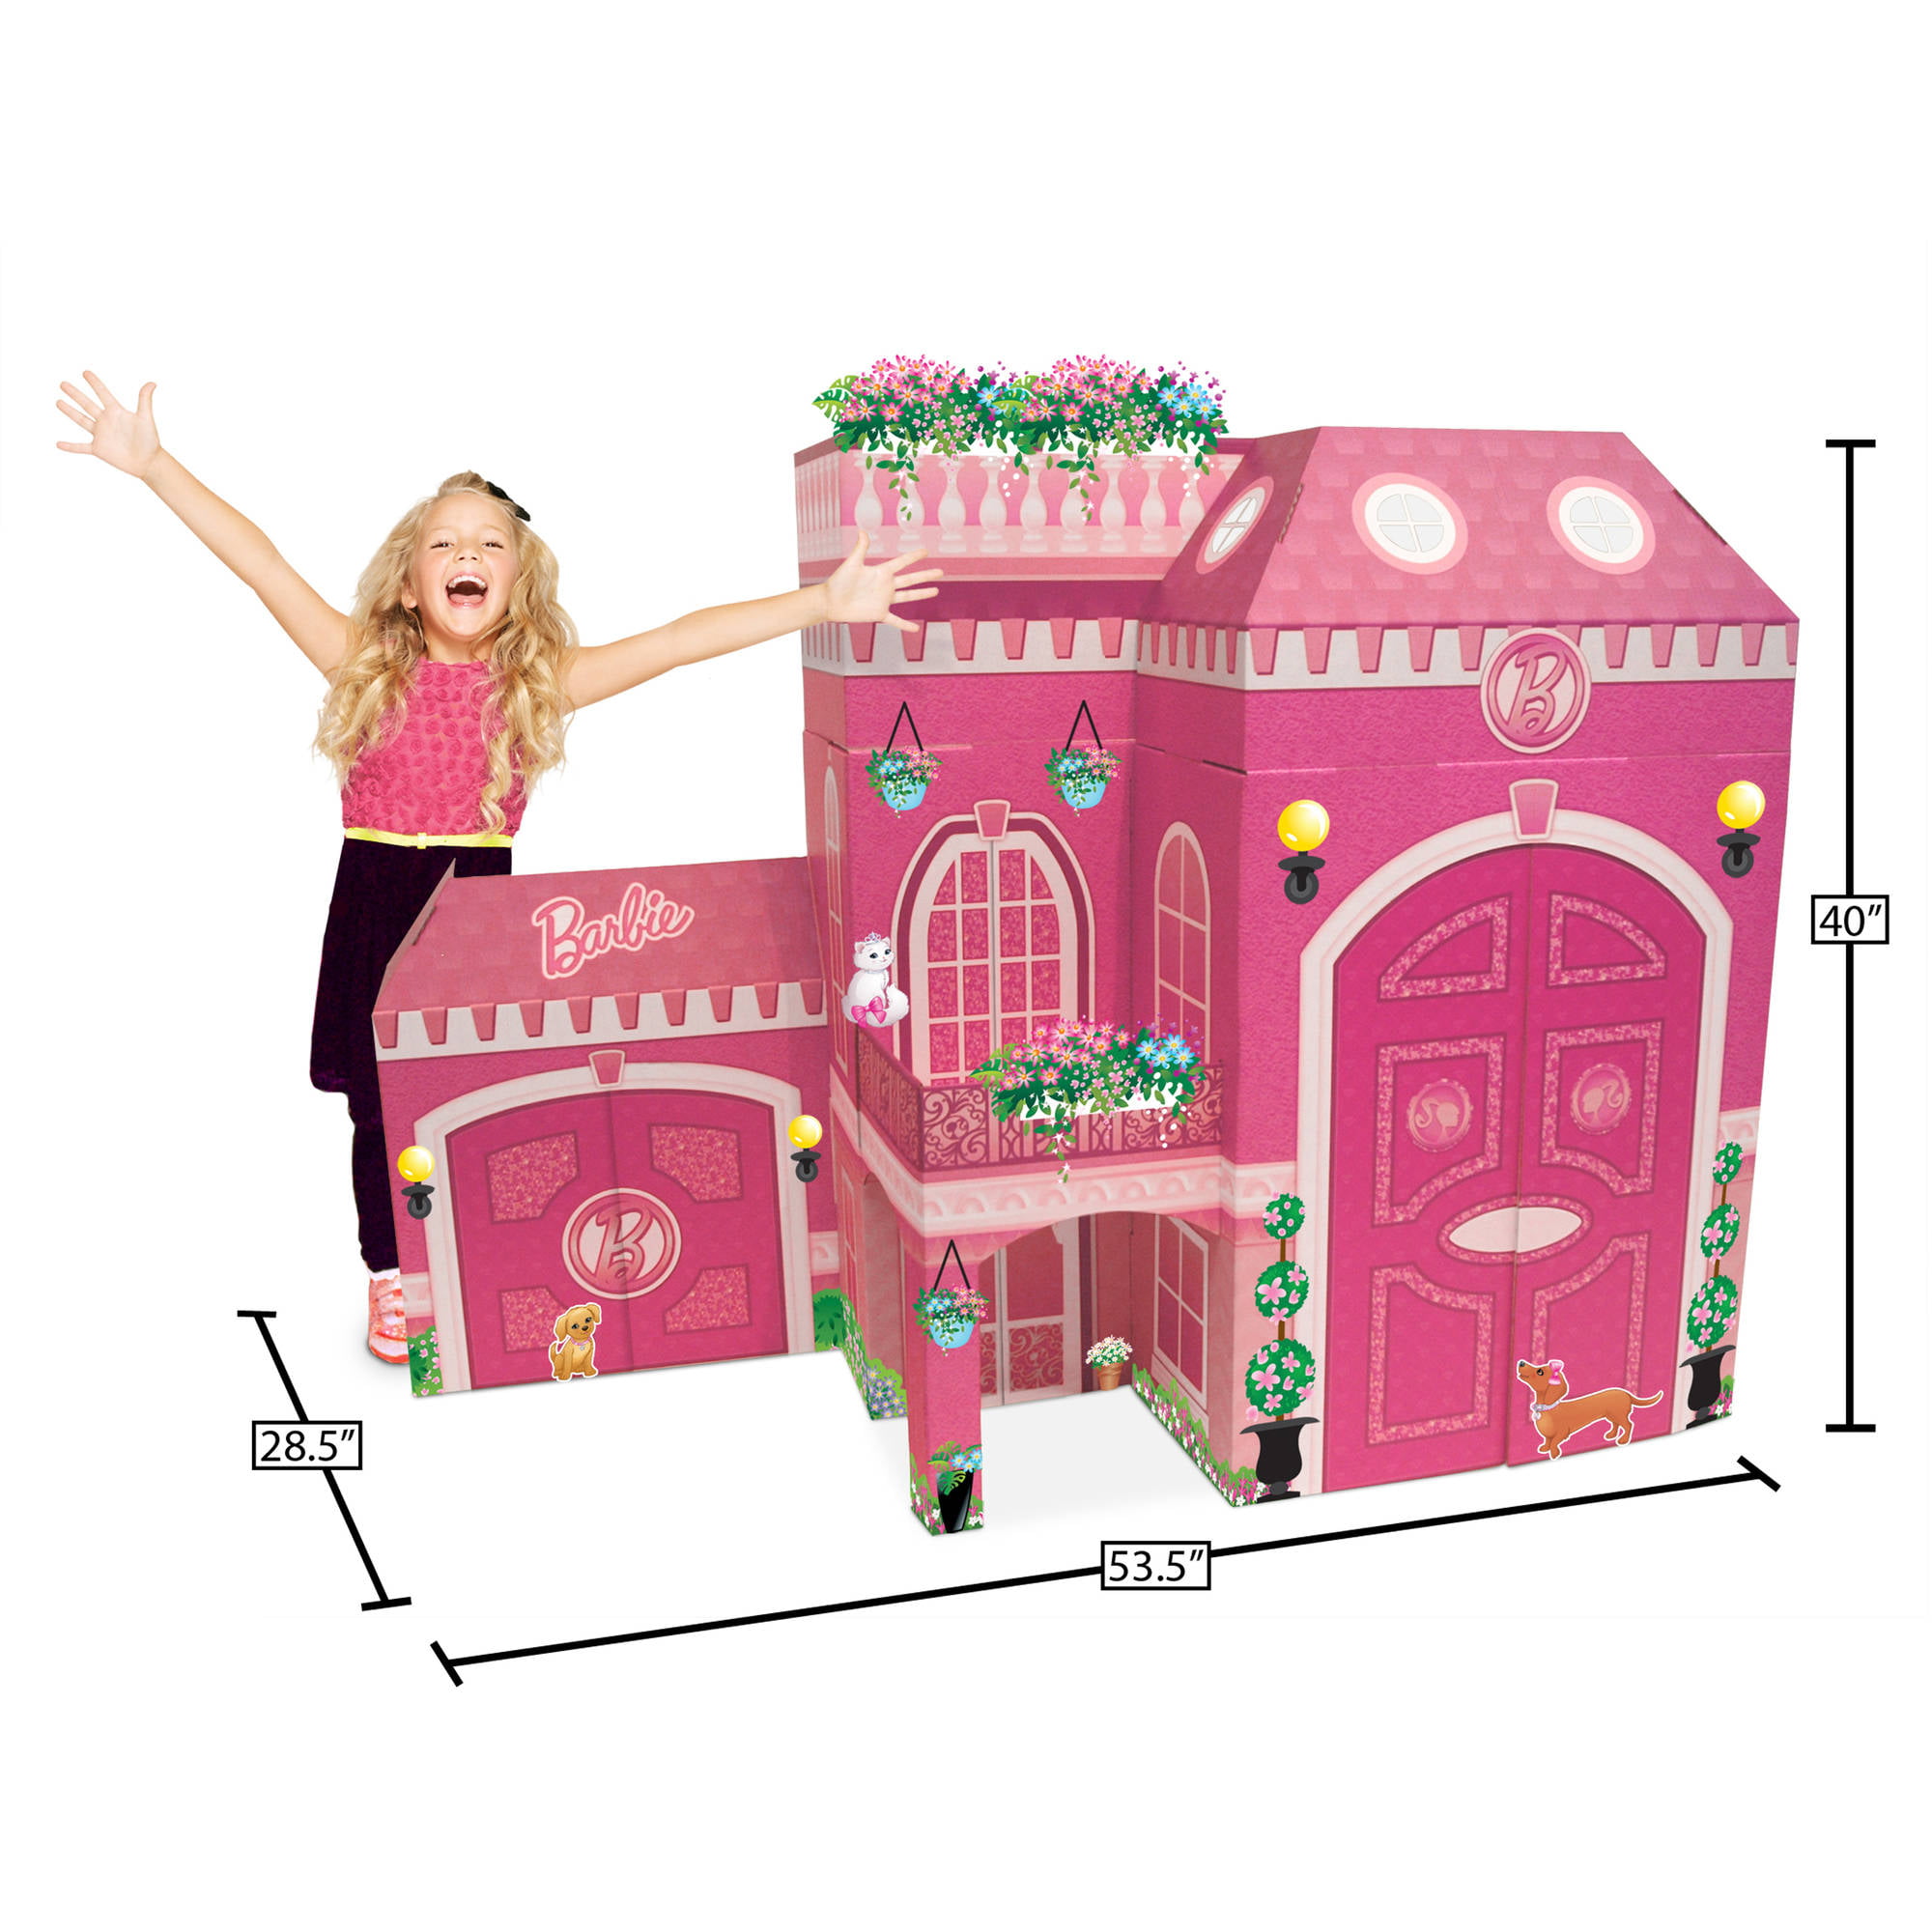 Neat-Oh! Barbie Full Size Play House 